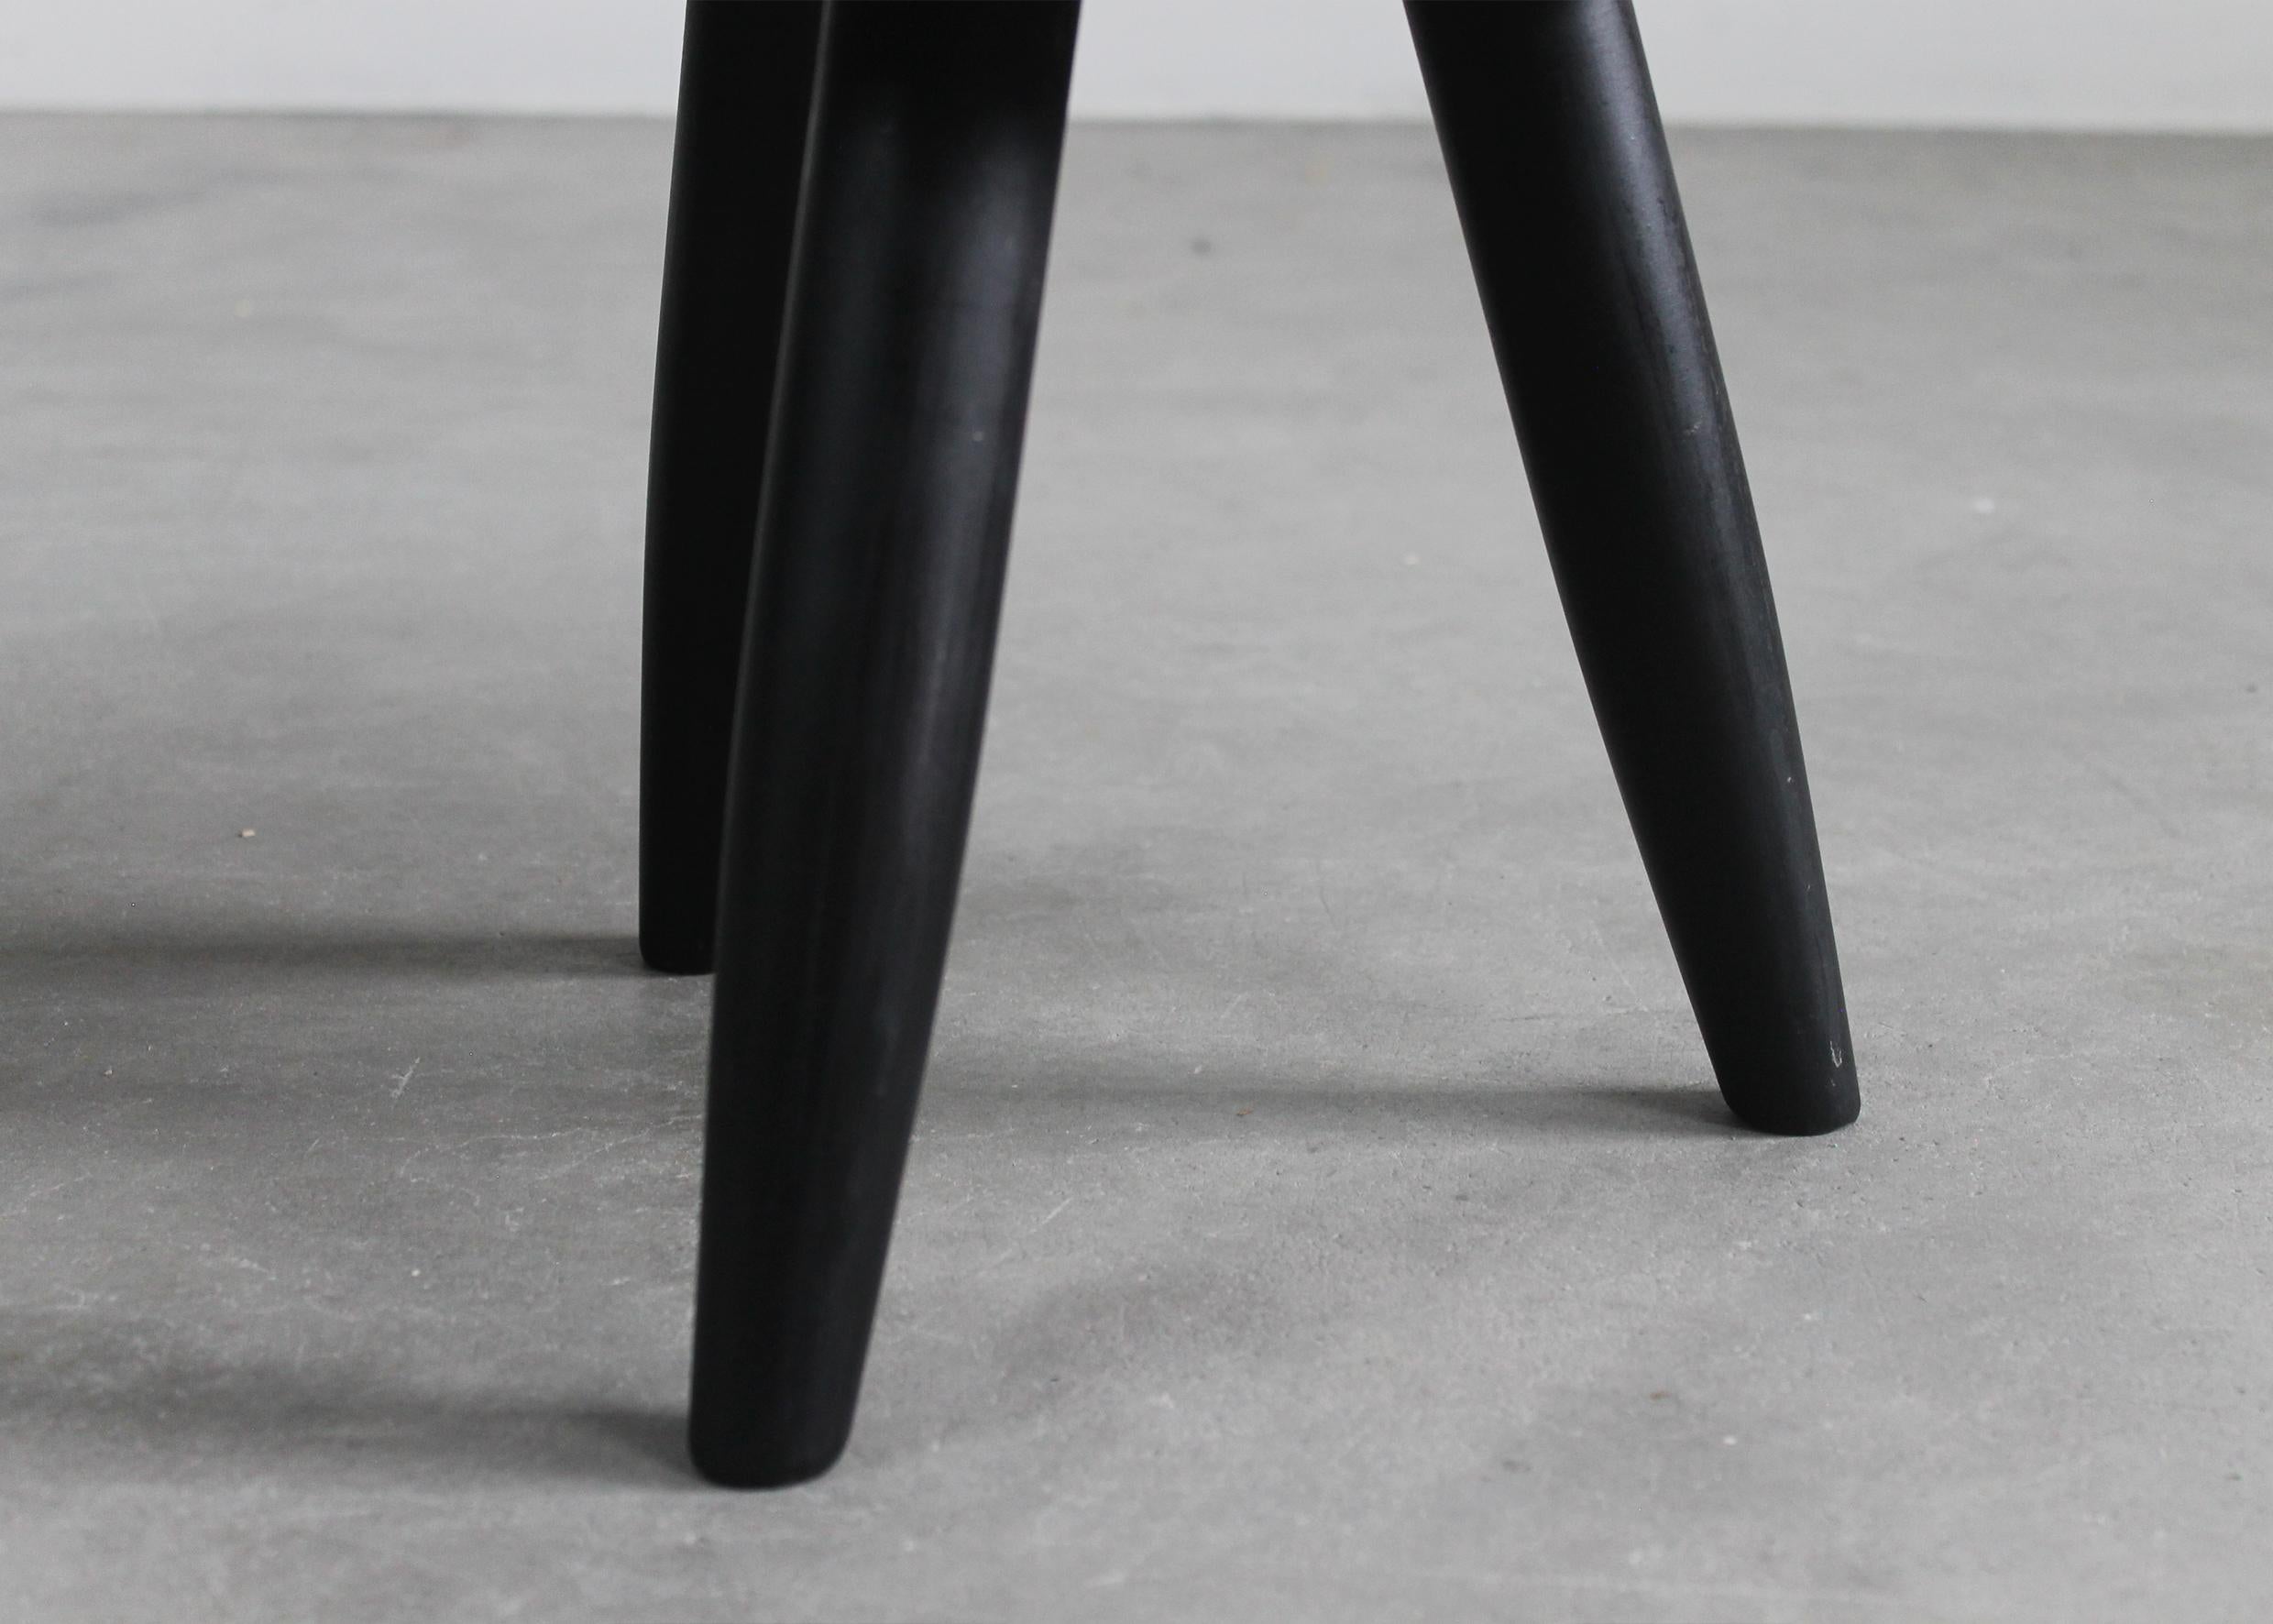 Stained Charlotte Perriand Set of Two Black Stools in Wood 1950s For Sale